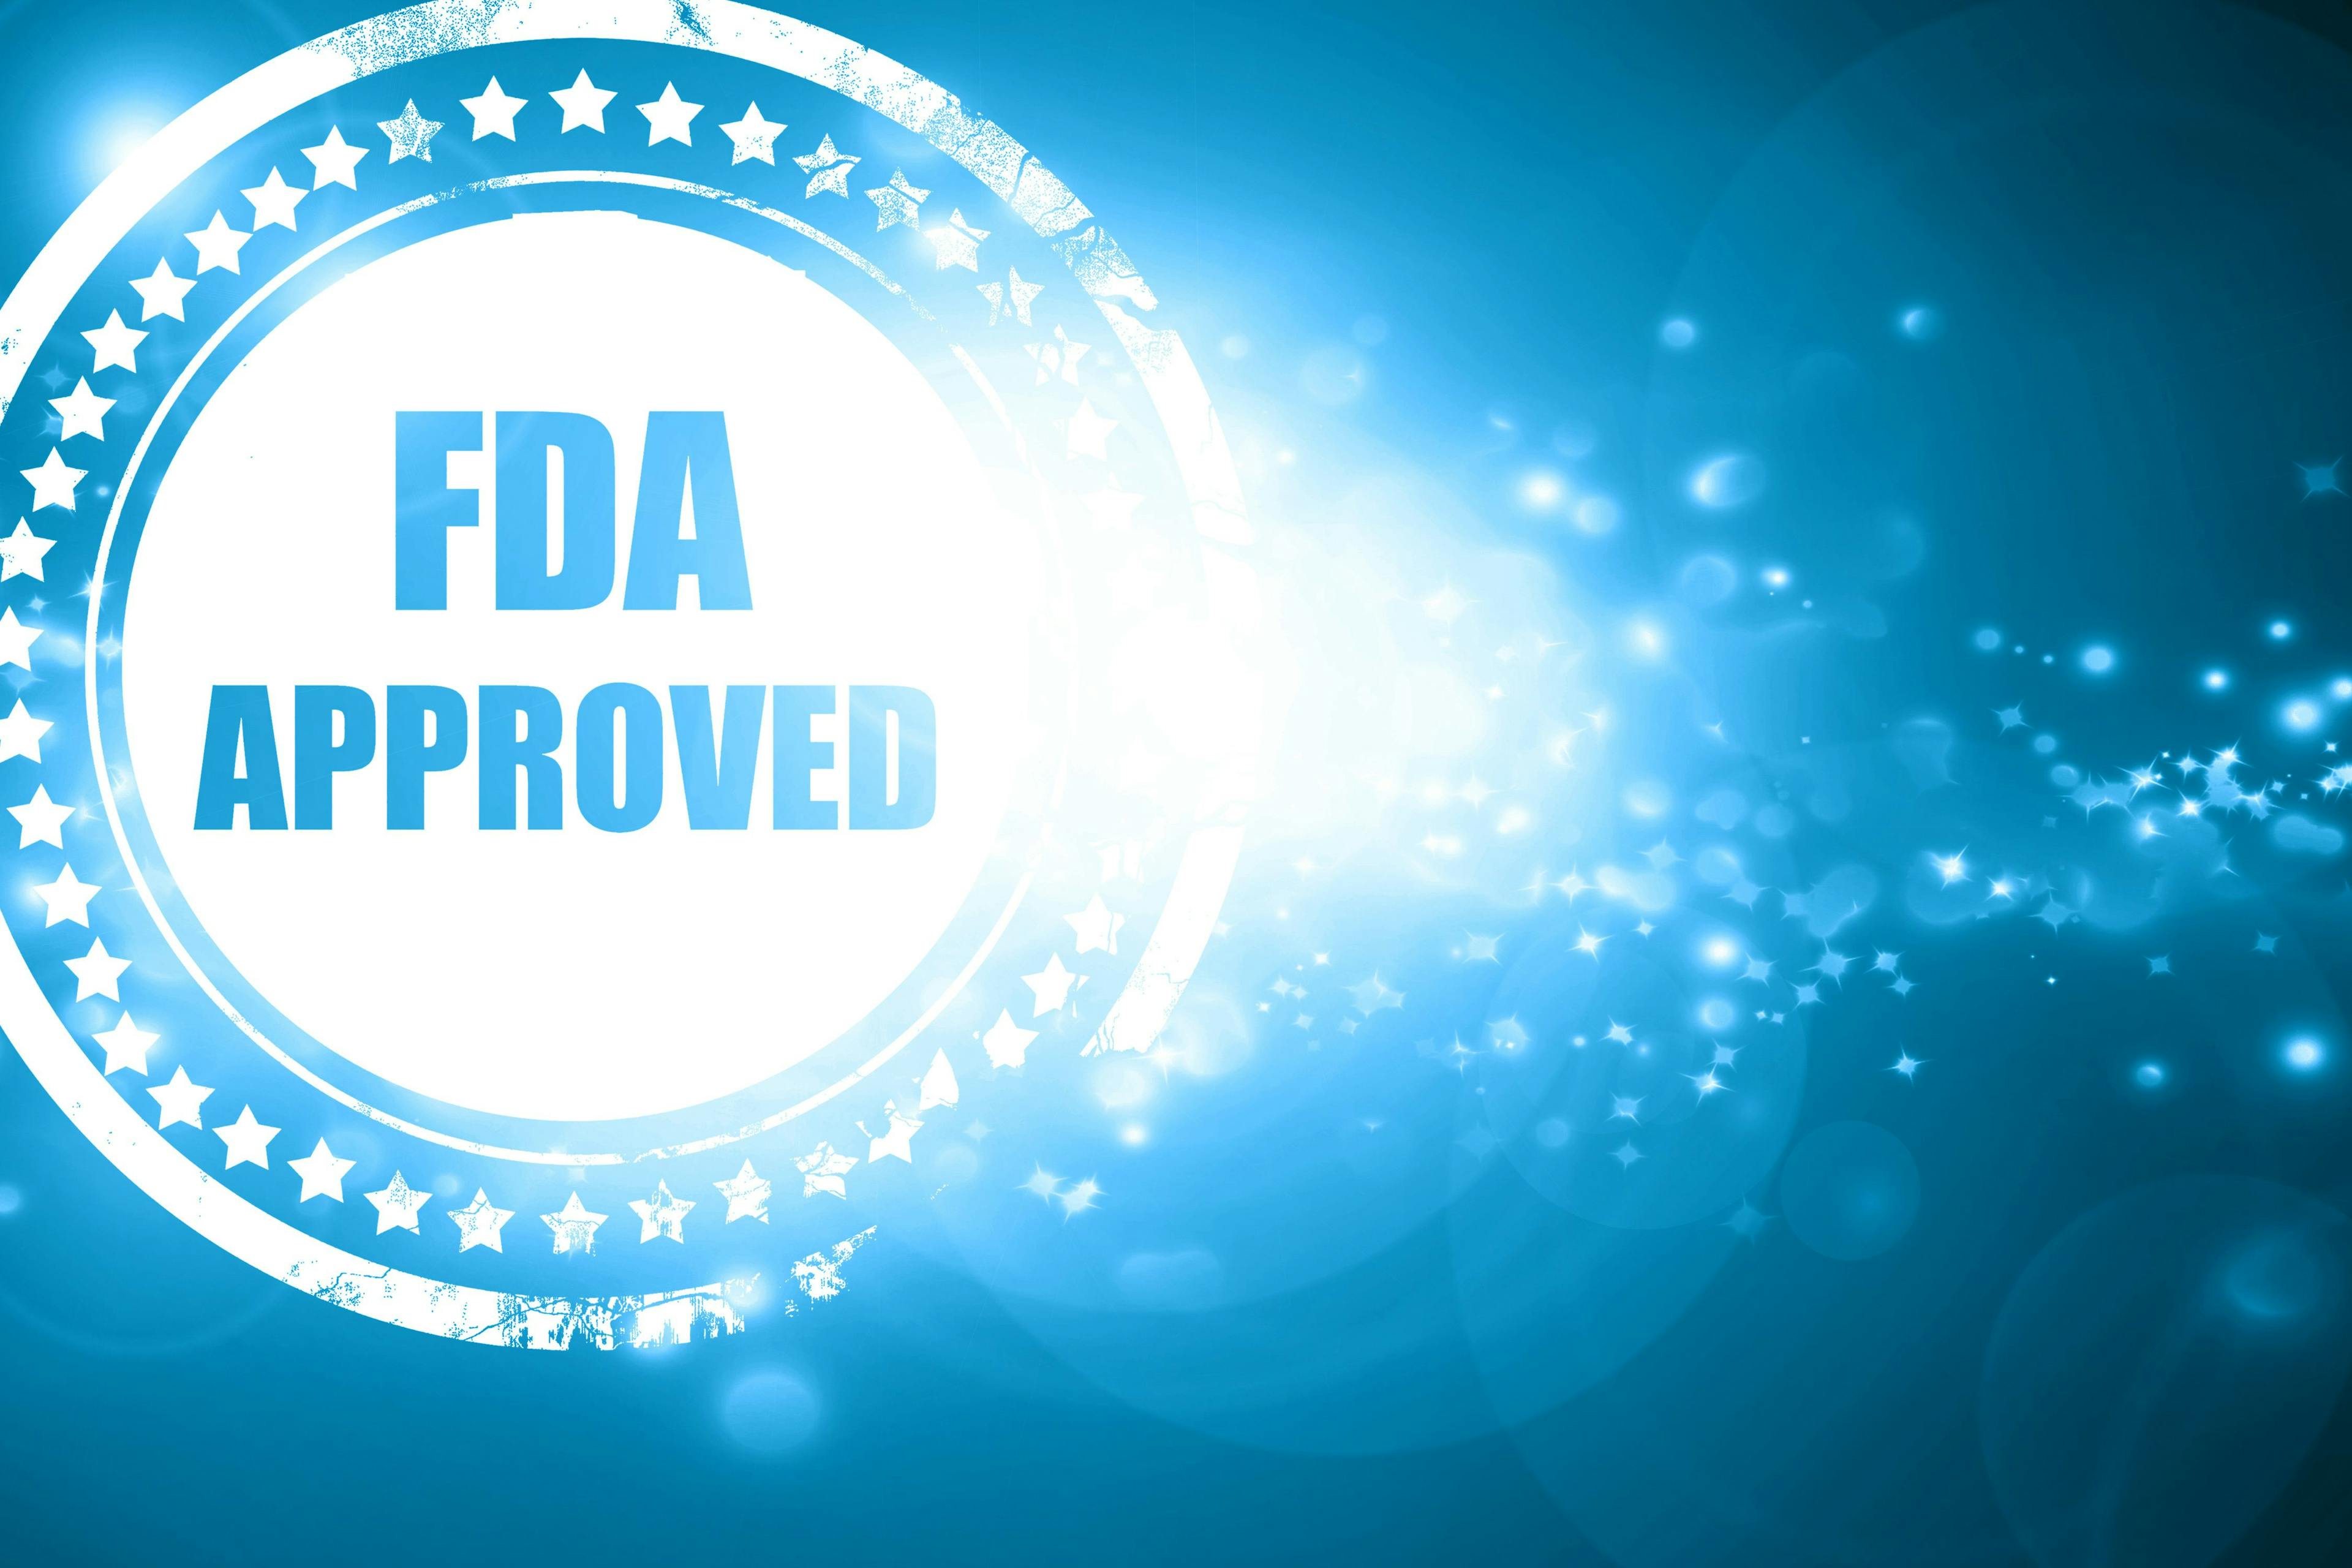 Blue stamp on a glittering background FDA Approved | Image Credit: Argus - stock.adobe.com